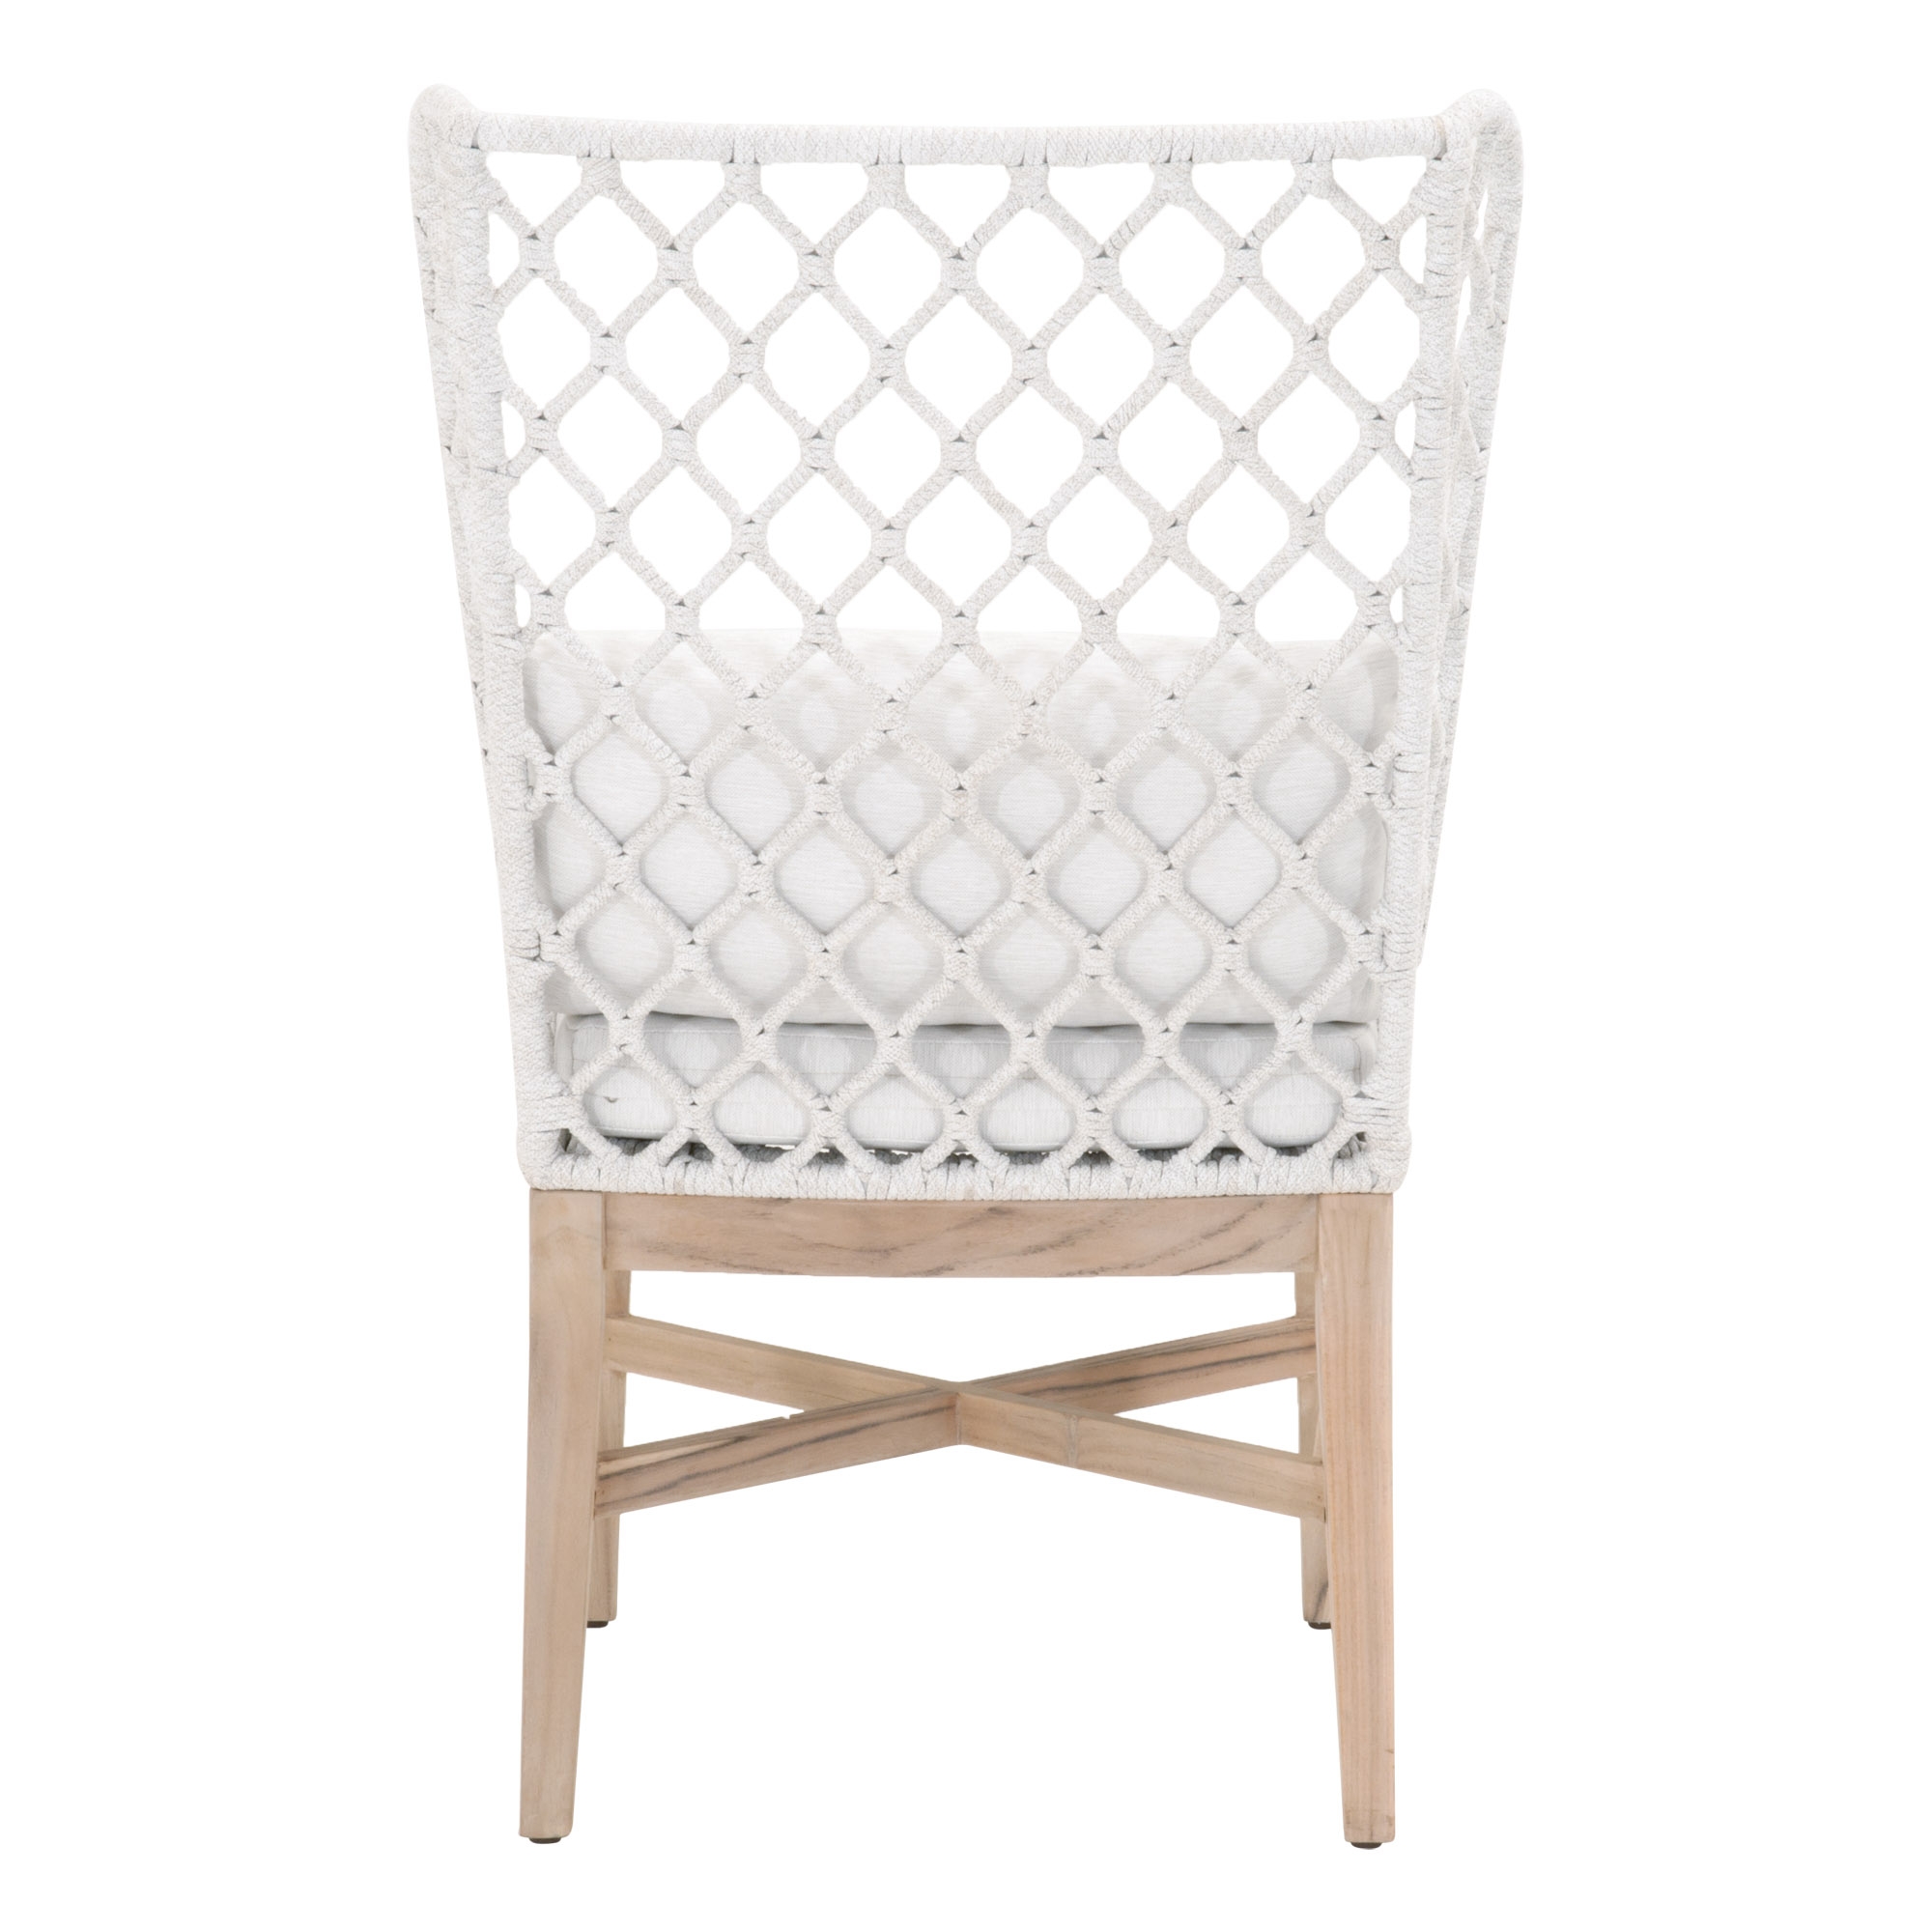 Lattis Outdoor Wing Chair, White - Image 4